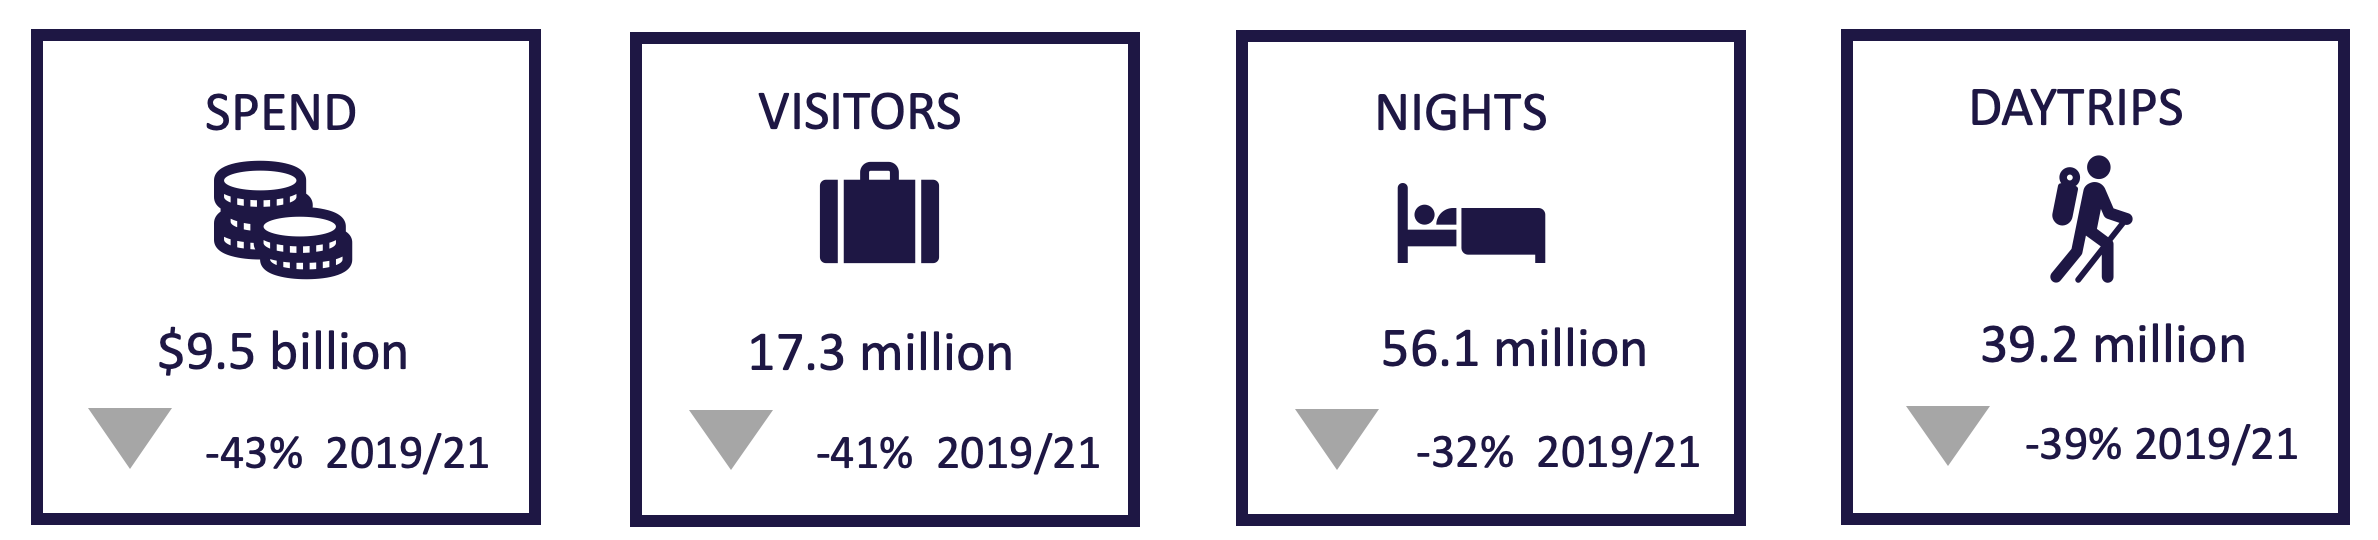 Some top line stats for domestic travel to and within Victoria for the year ending September 2021. Spend $9.5 billion down 43 per cent on the year ending September 2019. Visitors 17.3 million down 41 per cent on the year ending September 2019. Nights 56.1 million down 32 per cent on the year ending September 2019. Day trips 39.2 million down 39 per cent on the year ending September 2019.